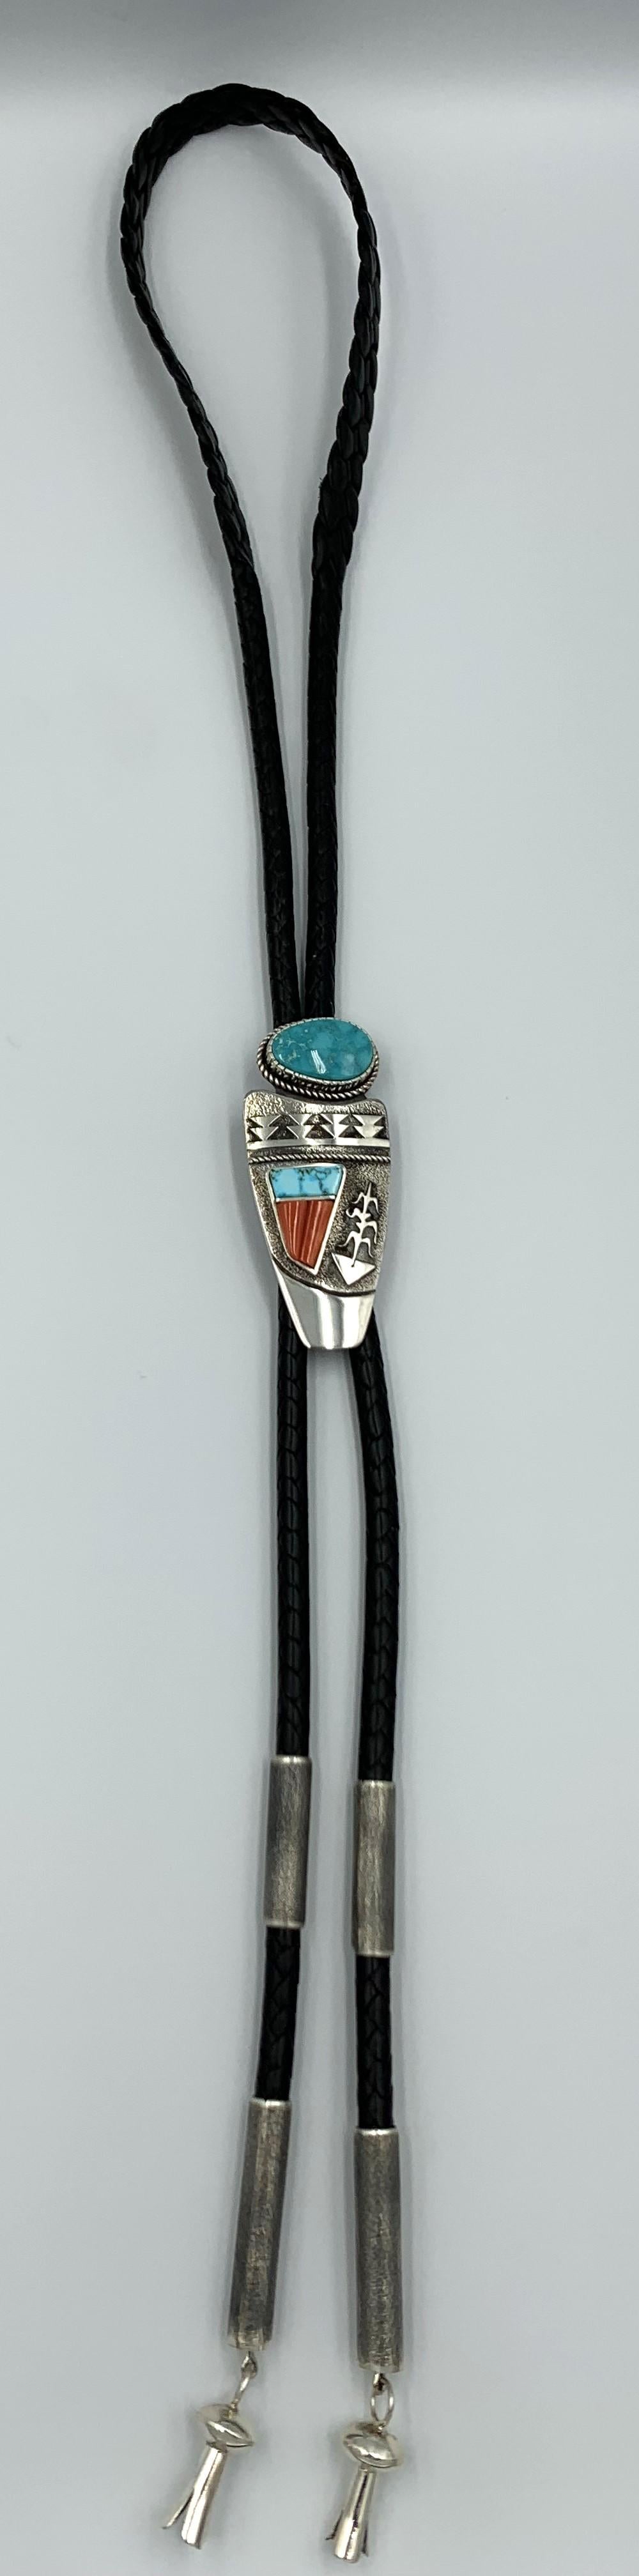 Sterling silver bolo tie by Navajo silversmith Jack Tom. The 1 3/8” x 3 1/4” silver overlay bolo has a 5/8” x 1” Pilot Mountain cabochon along with Blue Gem turquoise and coral overlay. The bolo is on a 46” braided leather strap with silver ends and